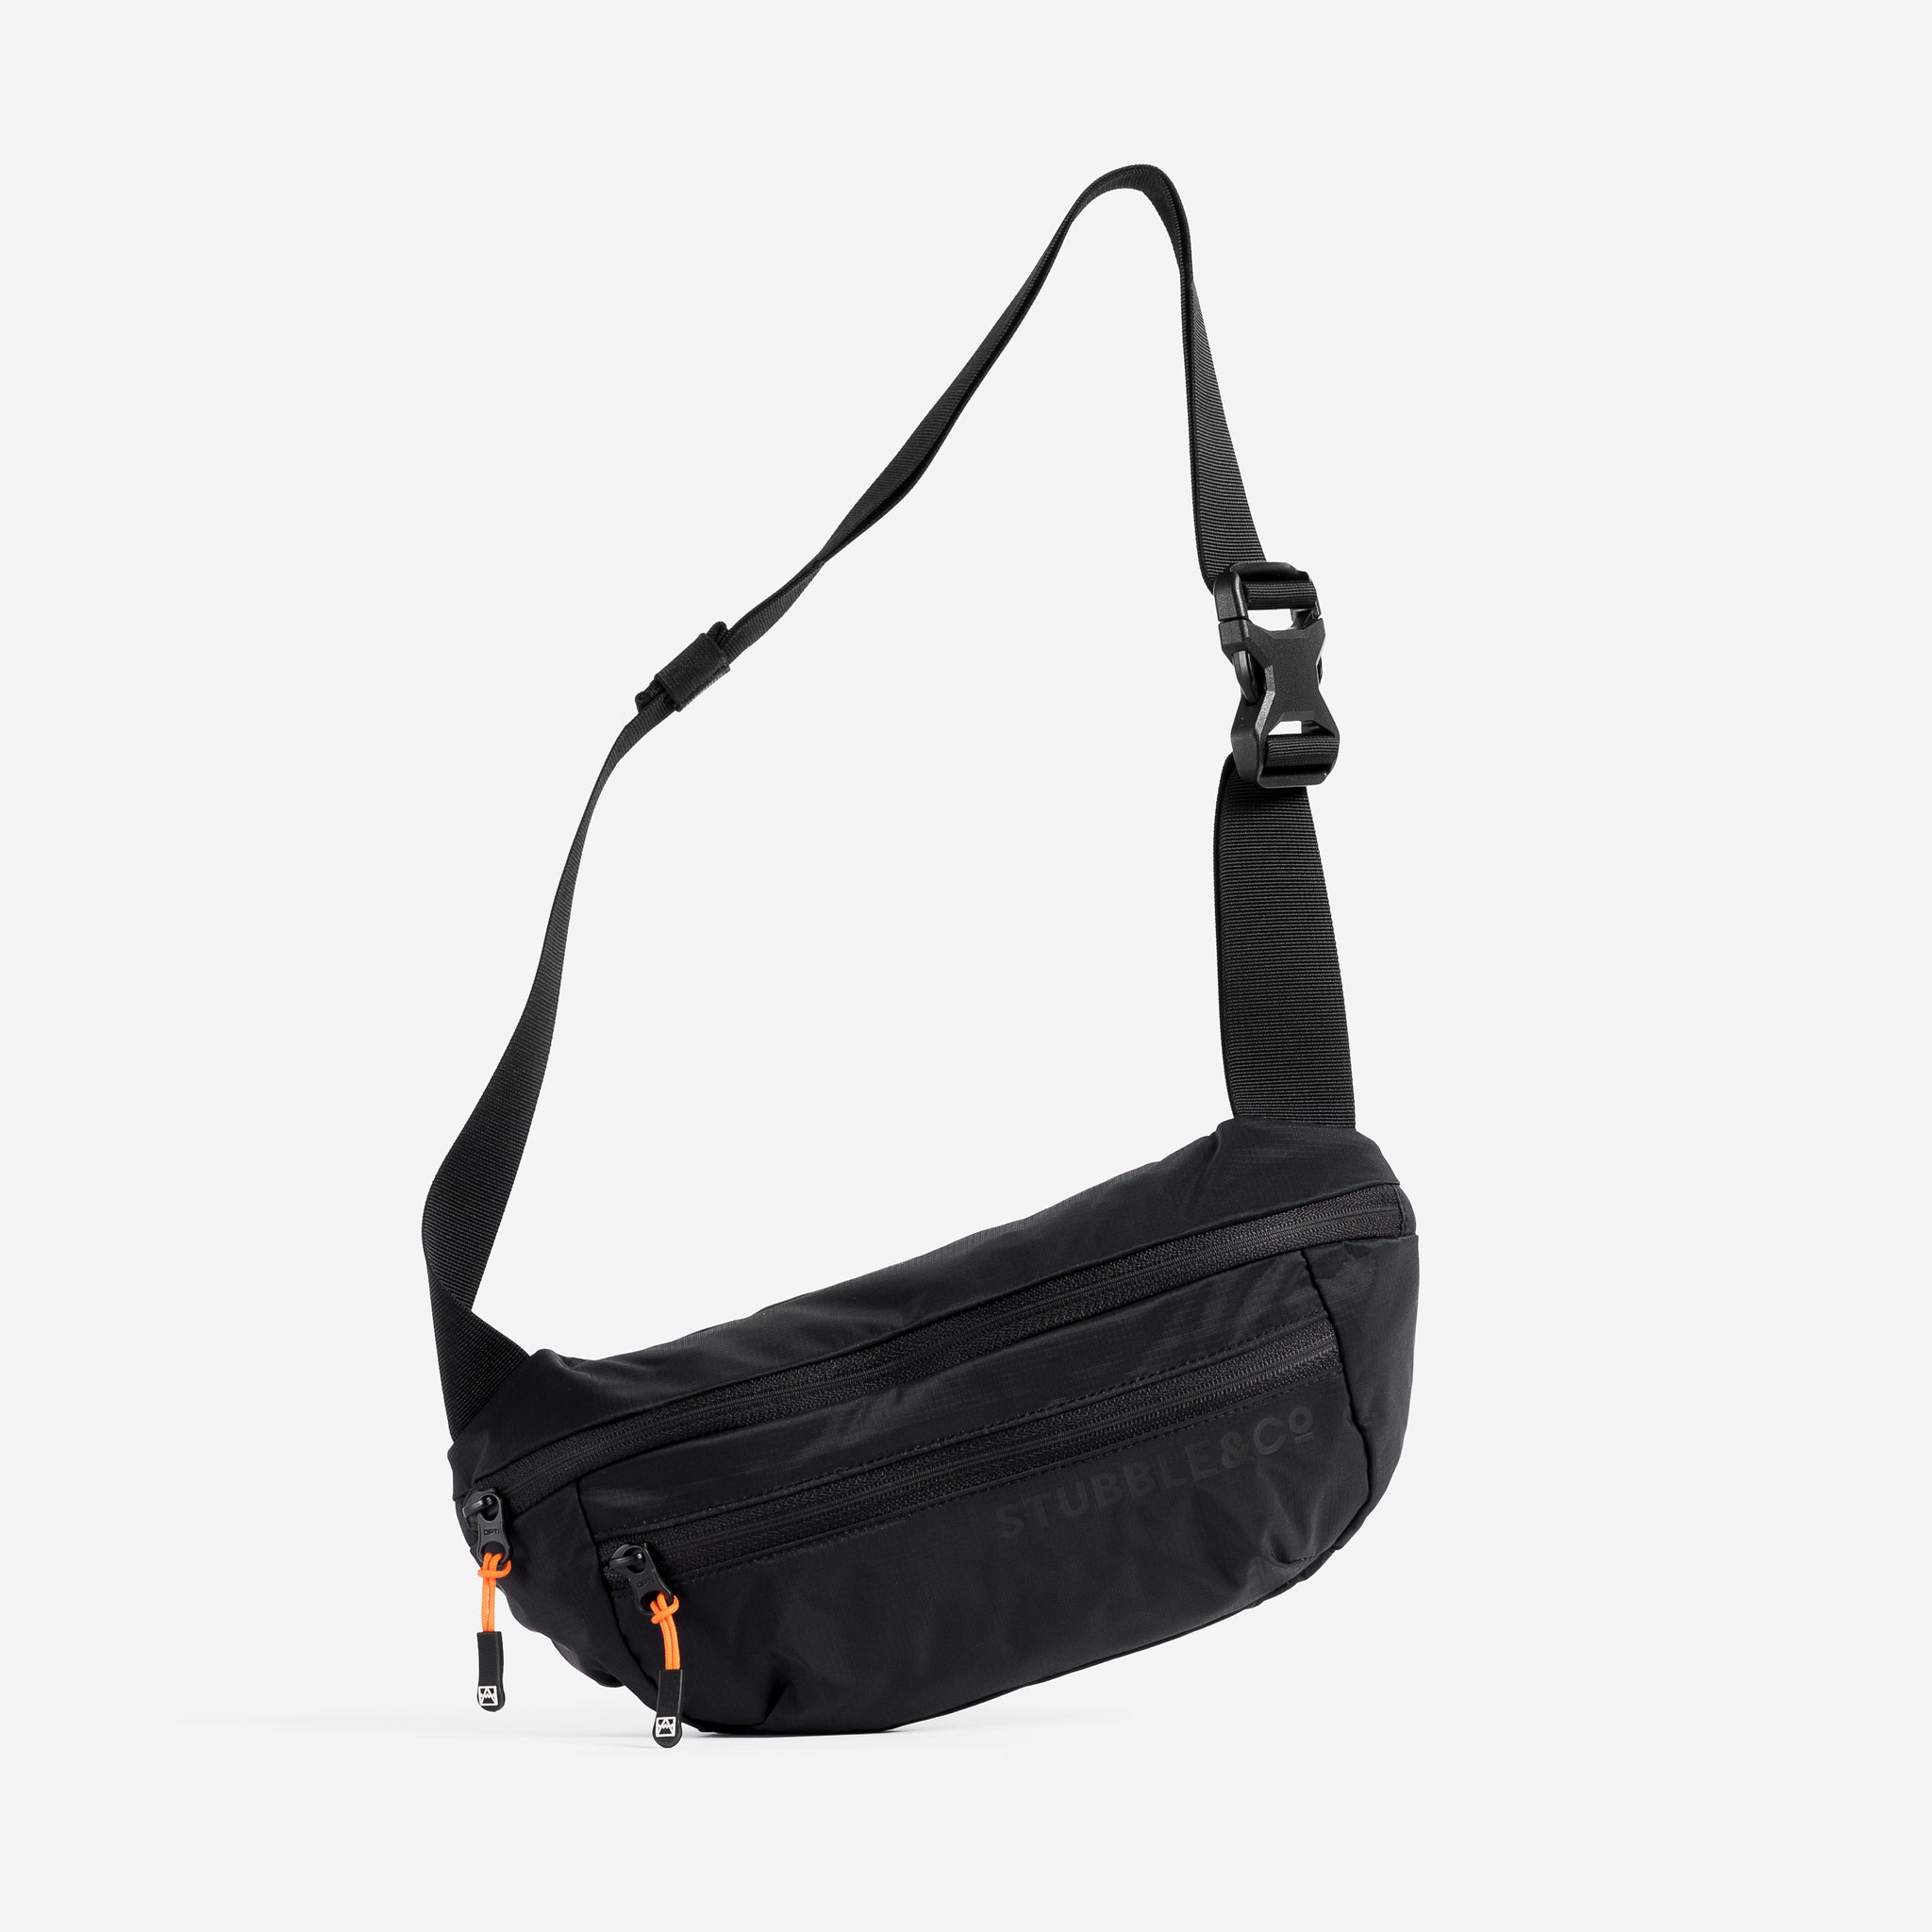 Front view of the All Black packable Ultra Light Crossbody Bag